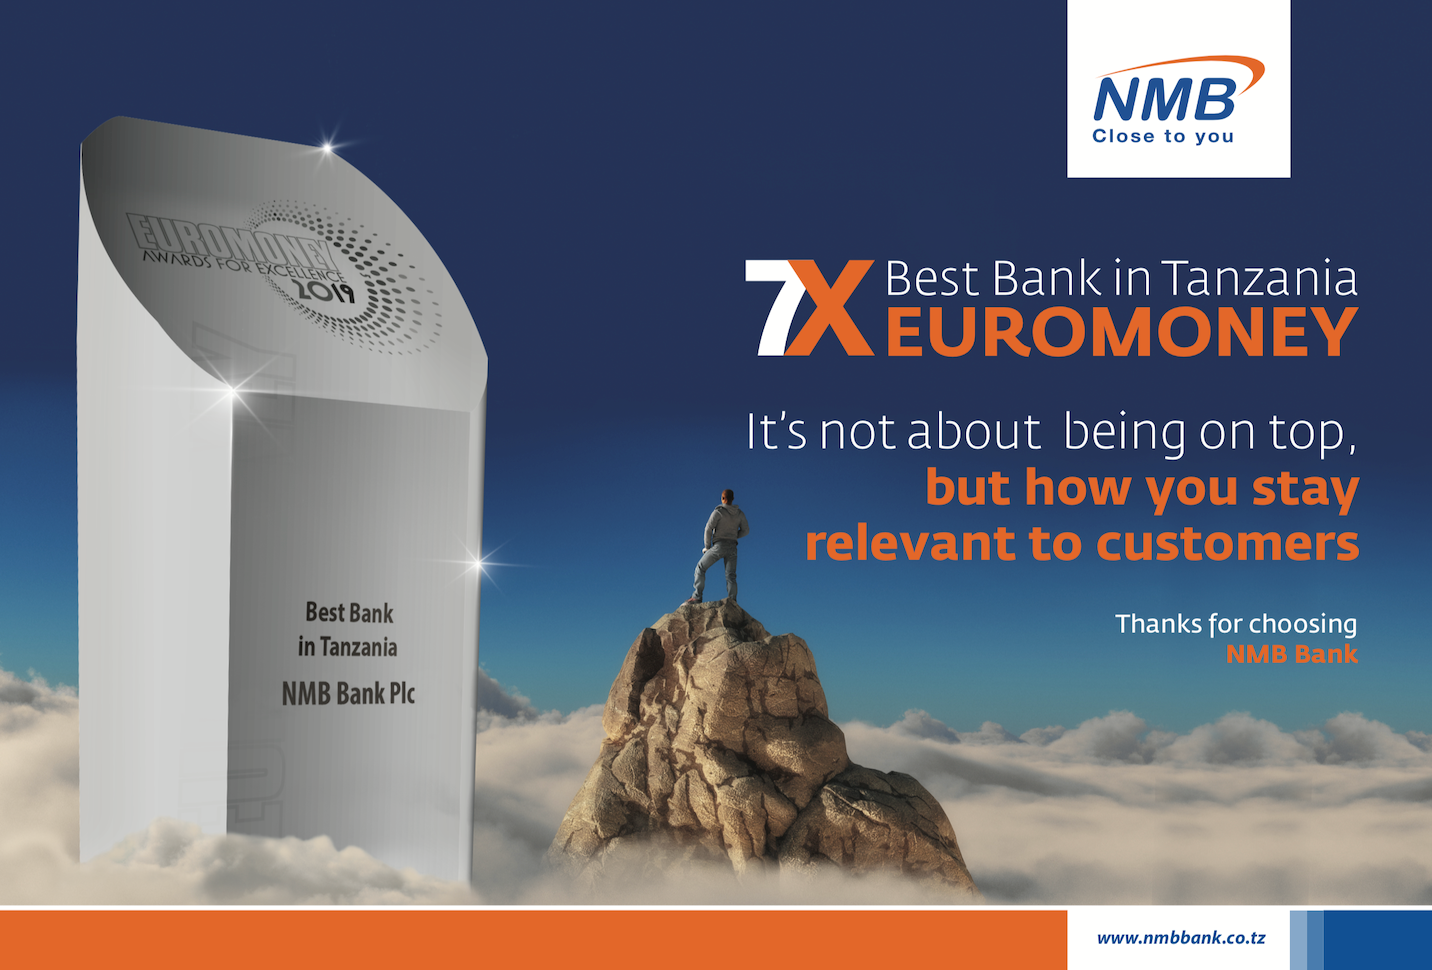 NMB wins Euromoney Awards 7th year in a row - NMB Bank Plc.